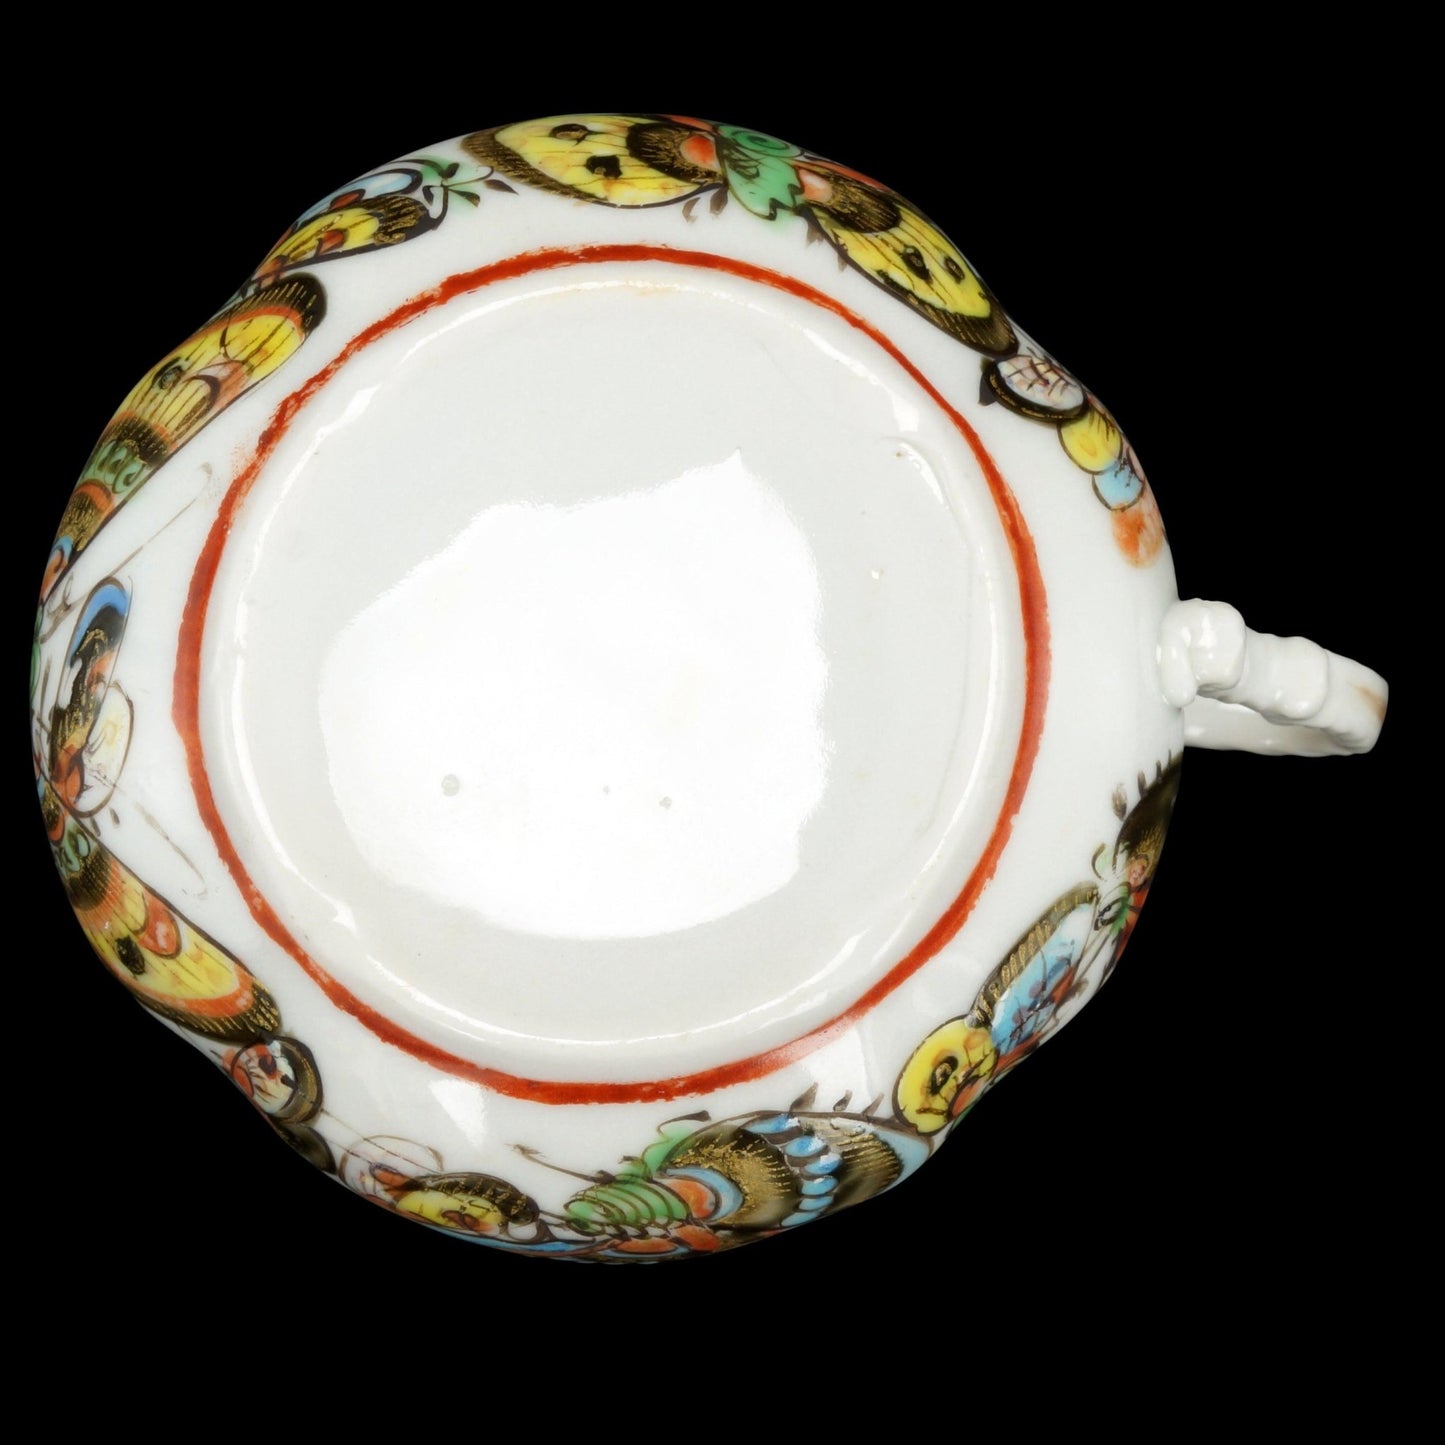 Chinese Polychrome Thousand Butterfly Teacup and Divided Saucer c 1900 - Bear and Raven Antiques